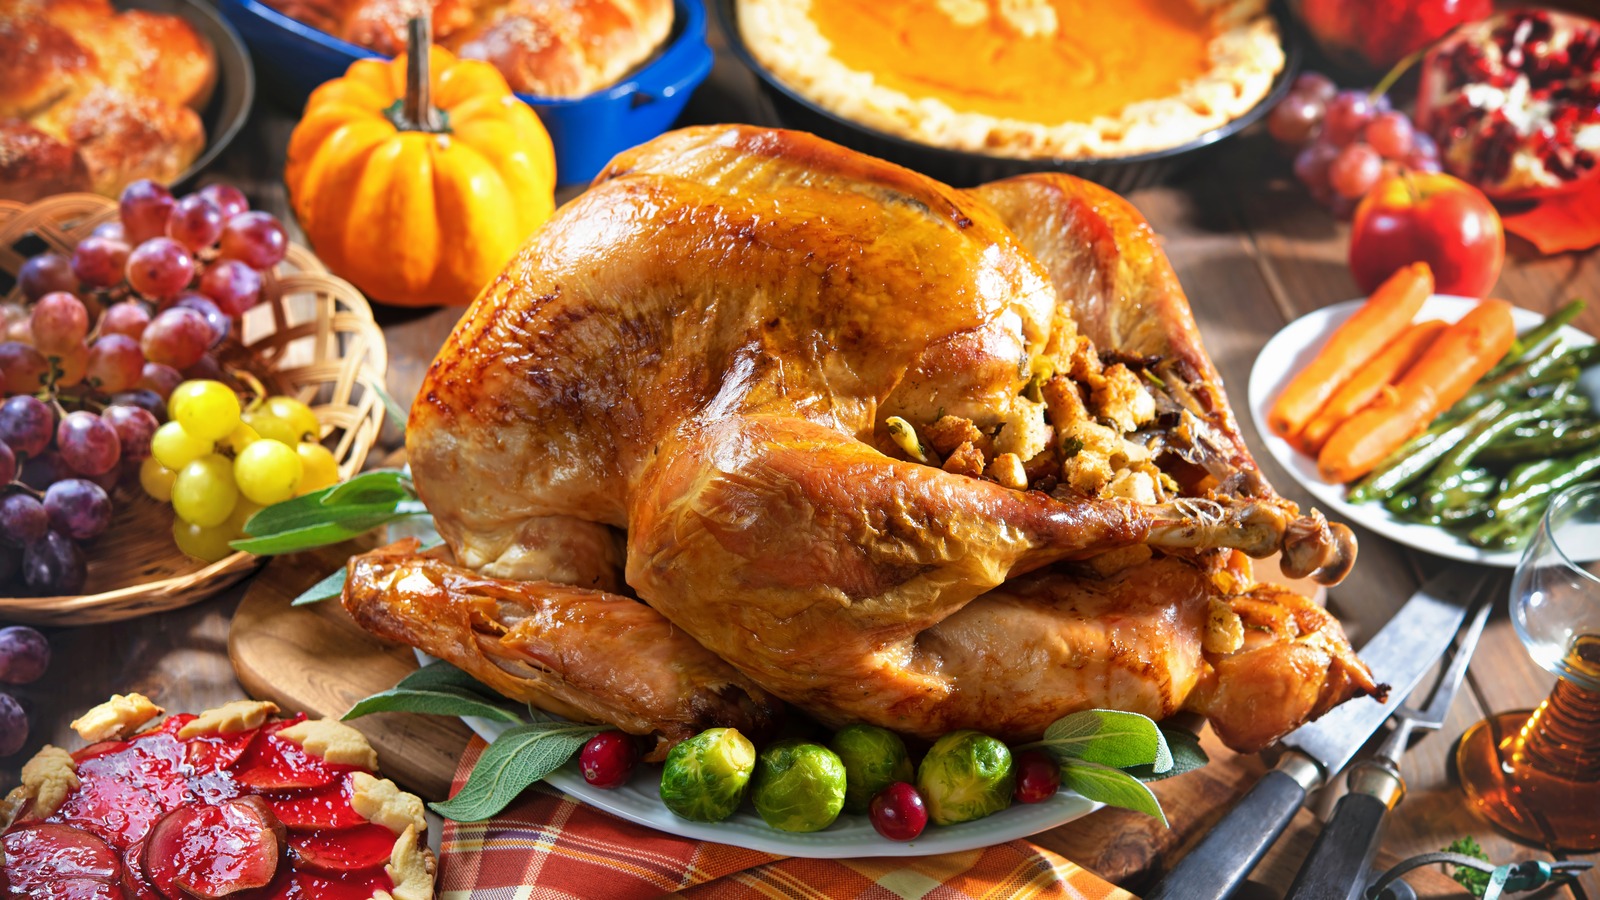 Can You Eat Too Much Turkey? - Health Digest